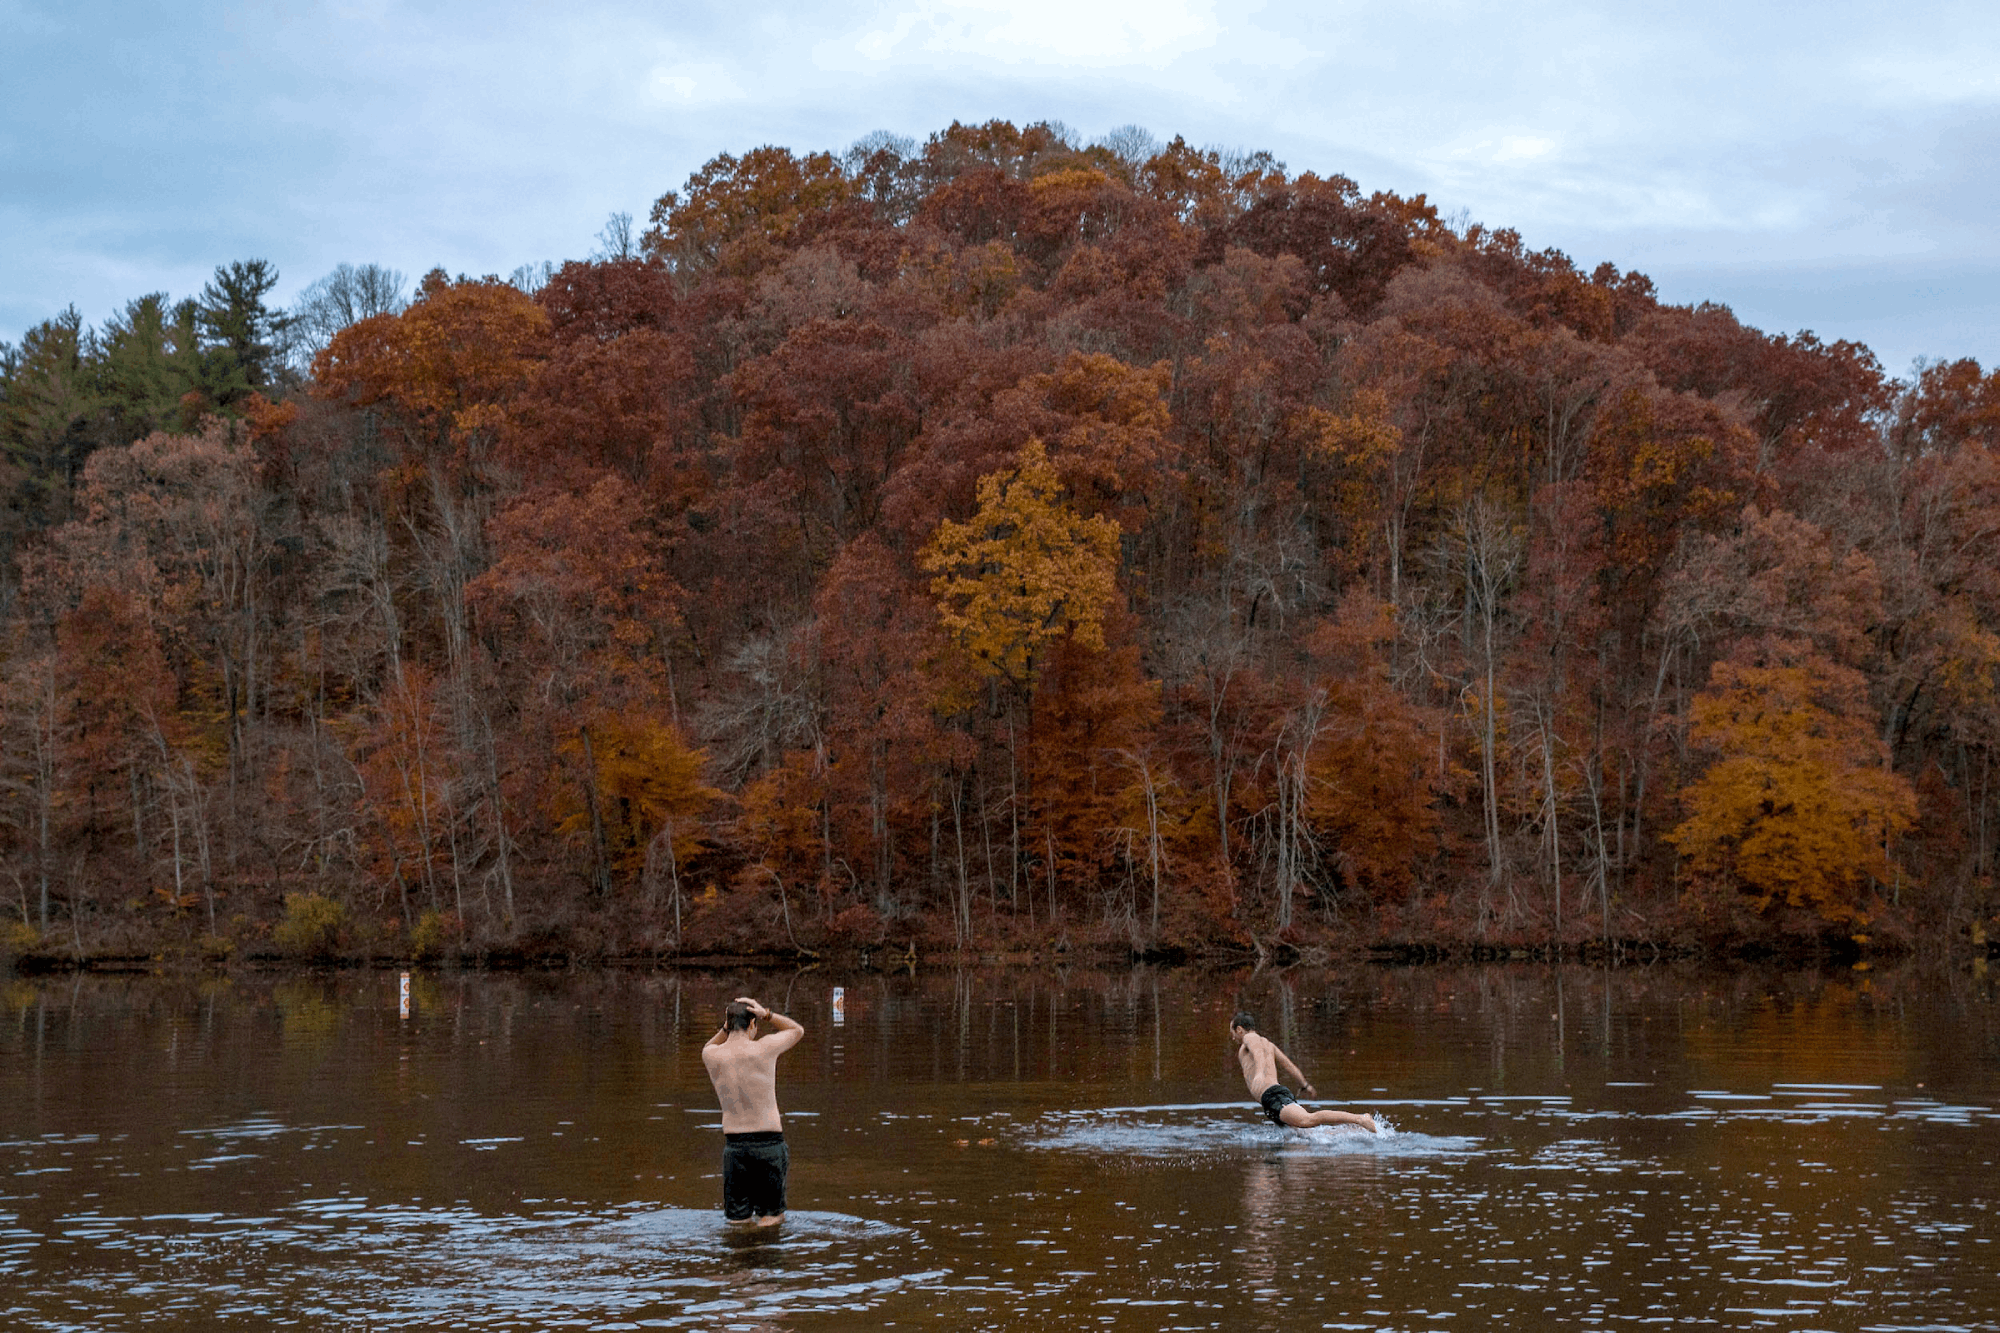 Students enjoy some bonus time swimming in Strouds Run State Park during unseasonably warm fall temperatures.